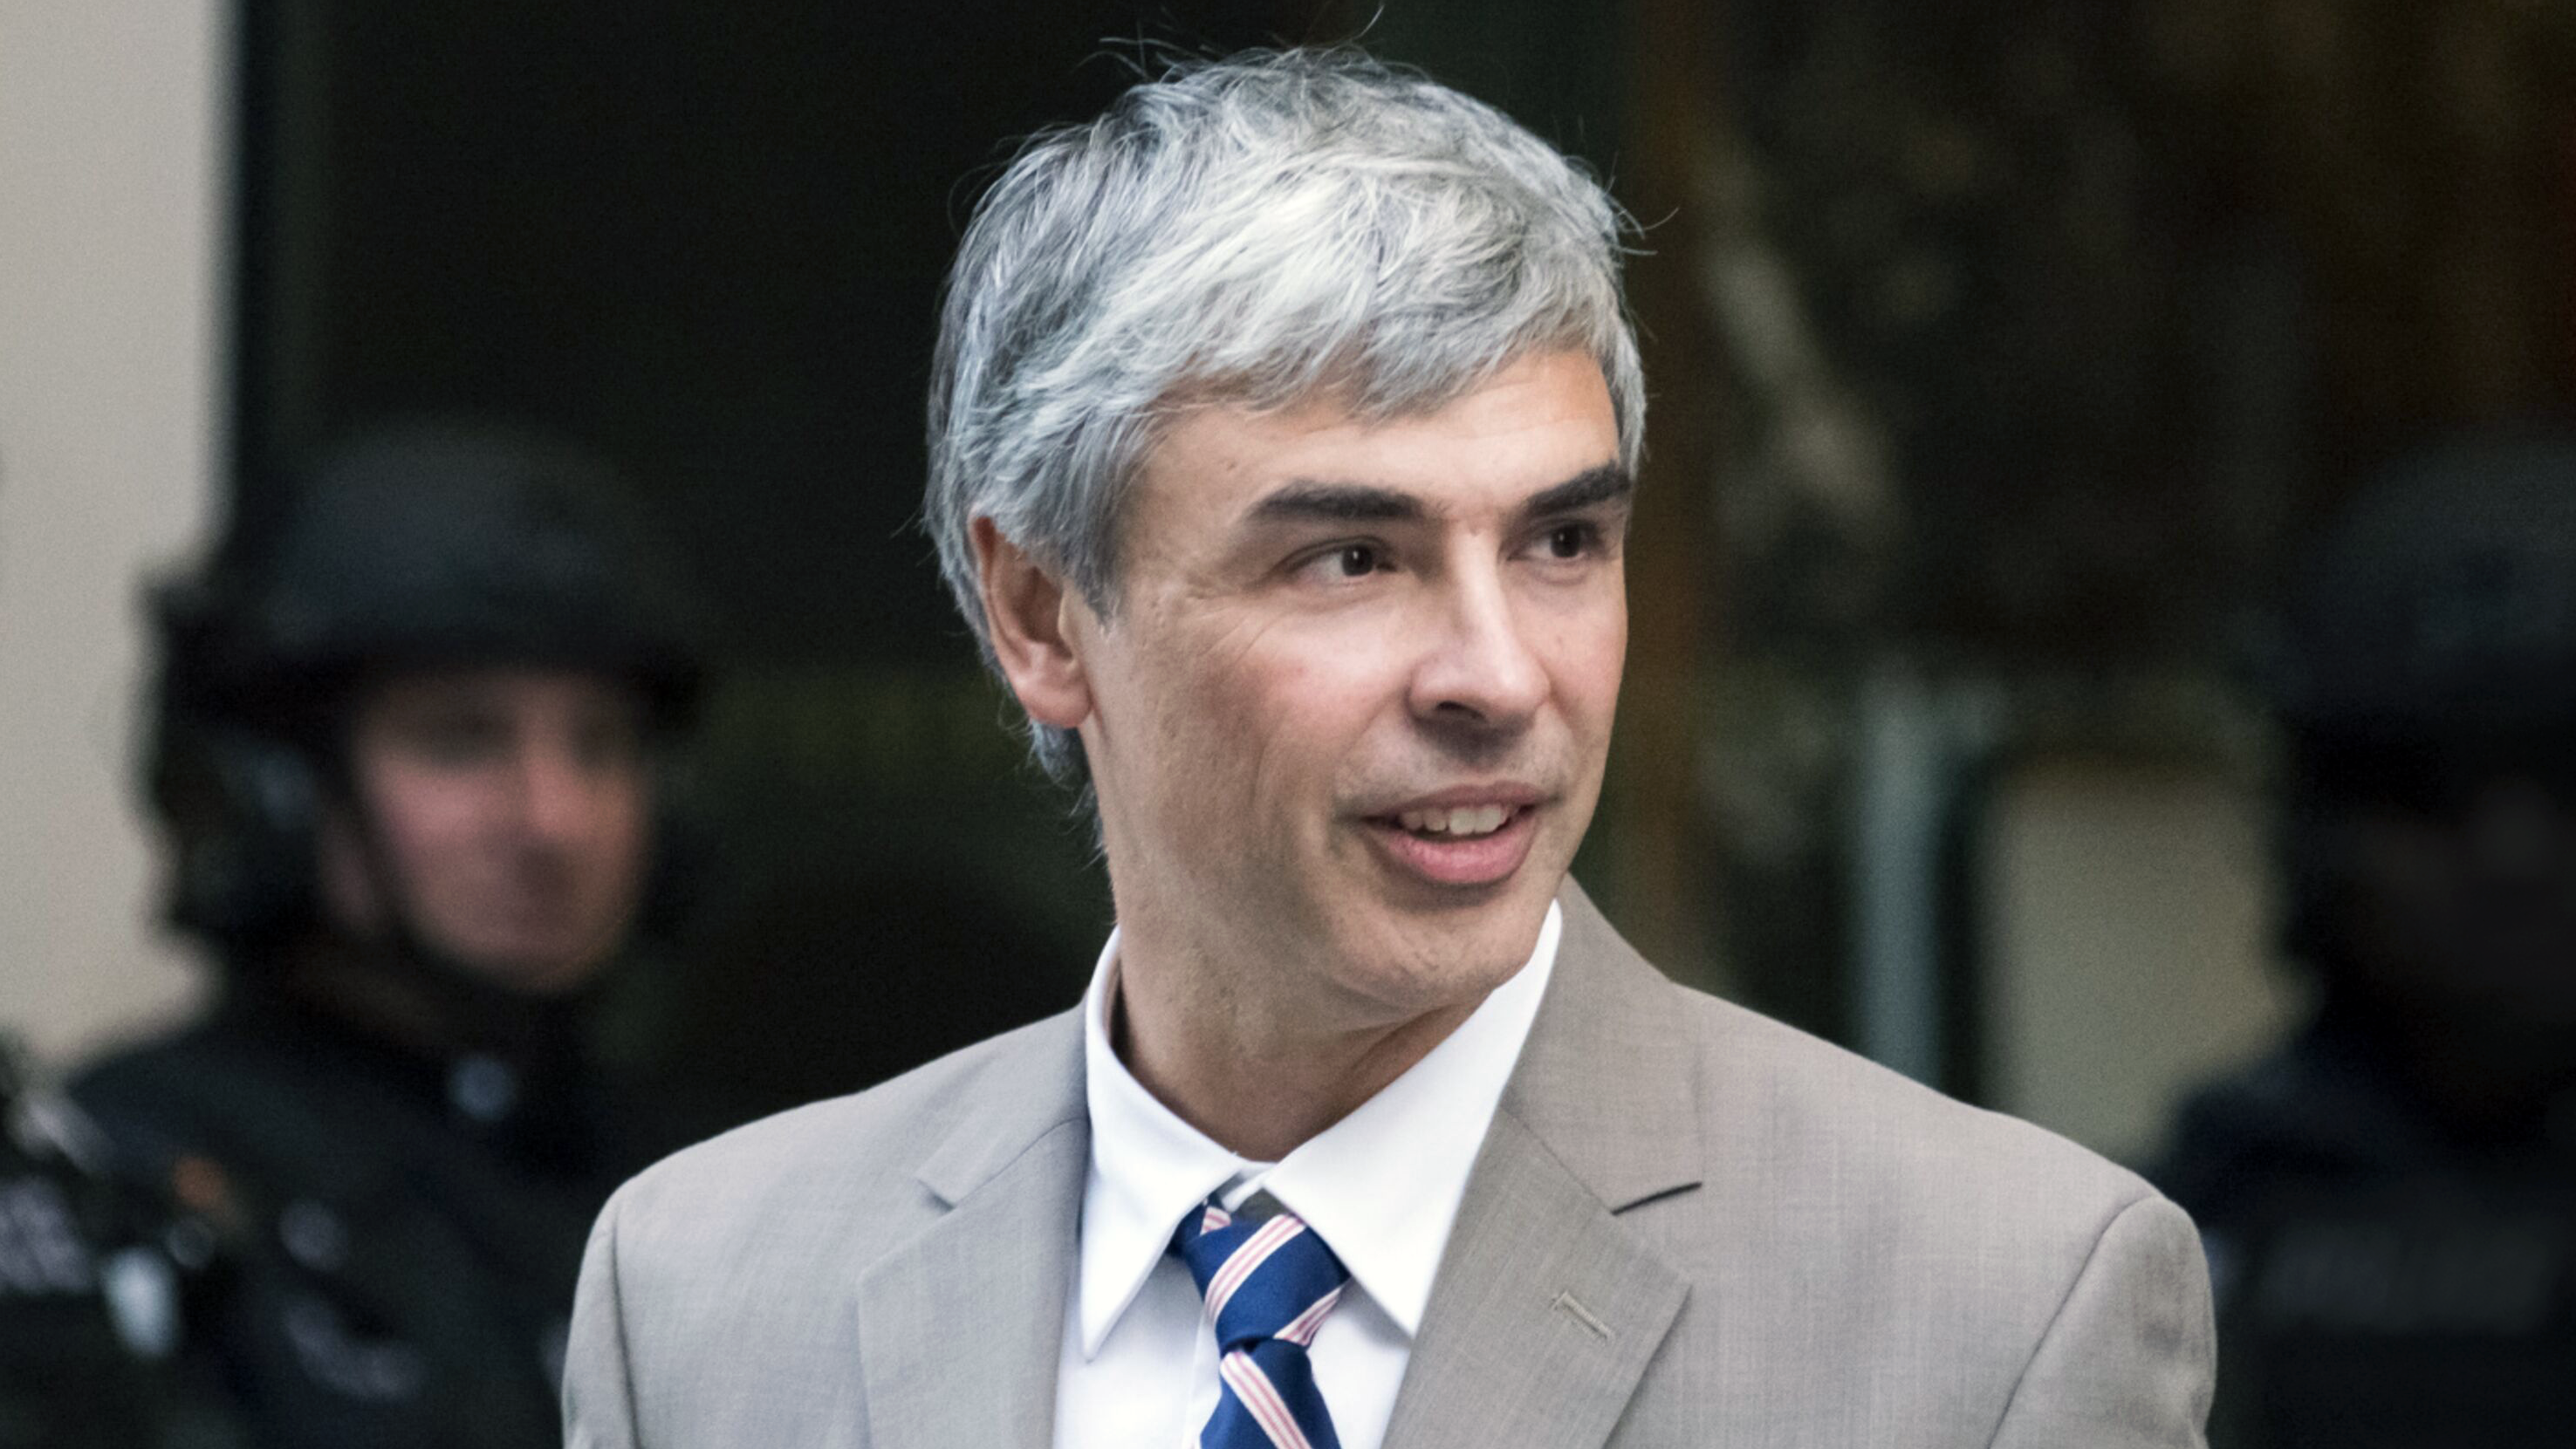 Larry Page's Net Worth - How Rich is Google's Co-founder?